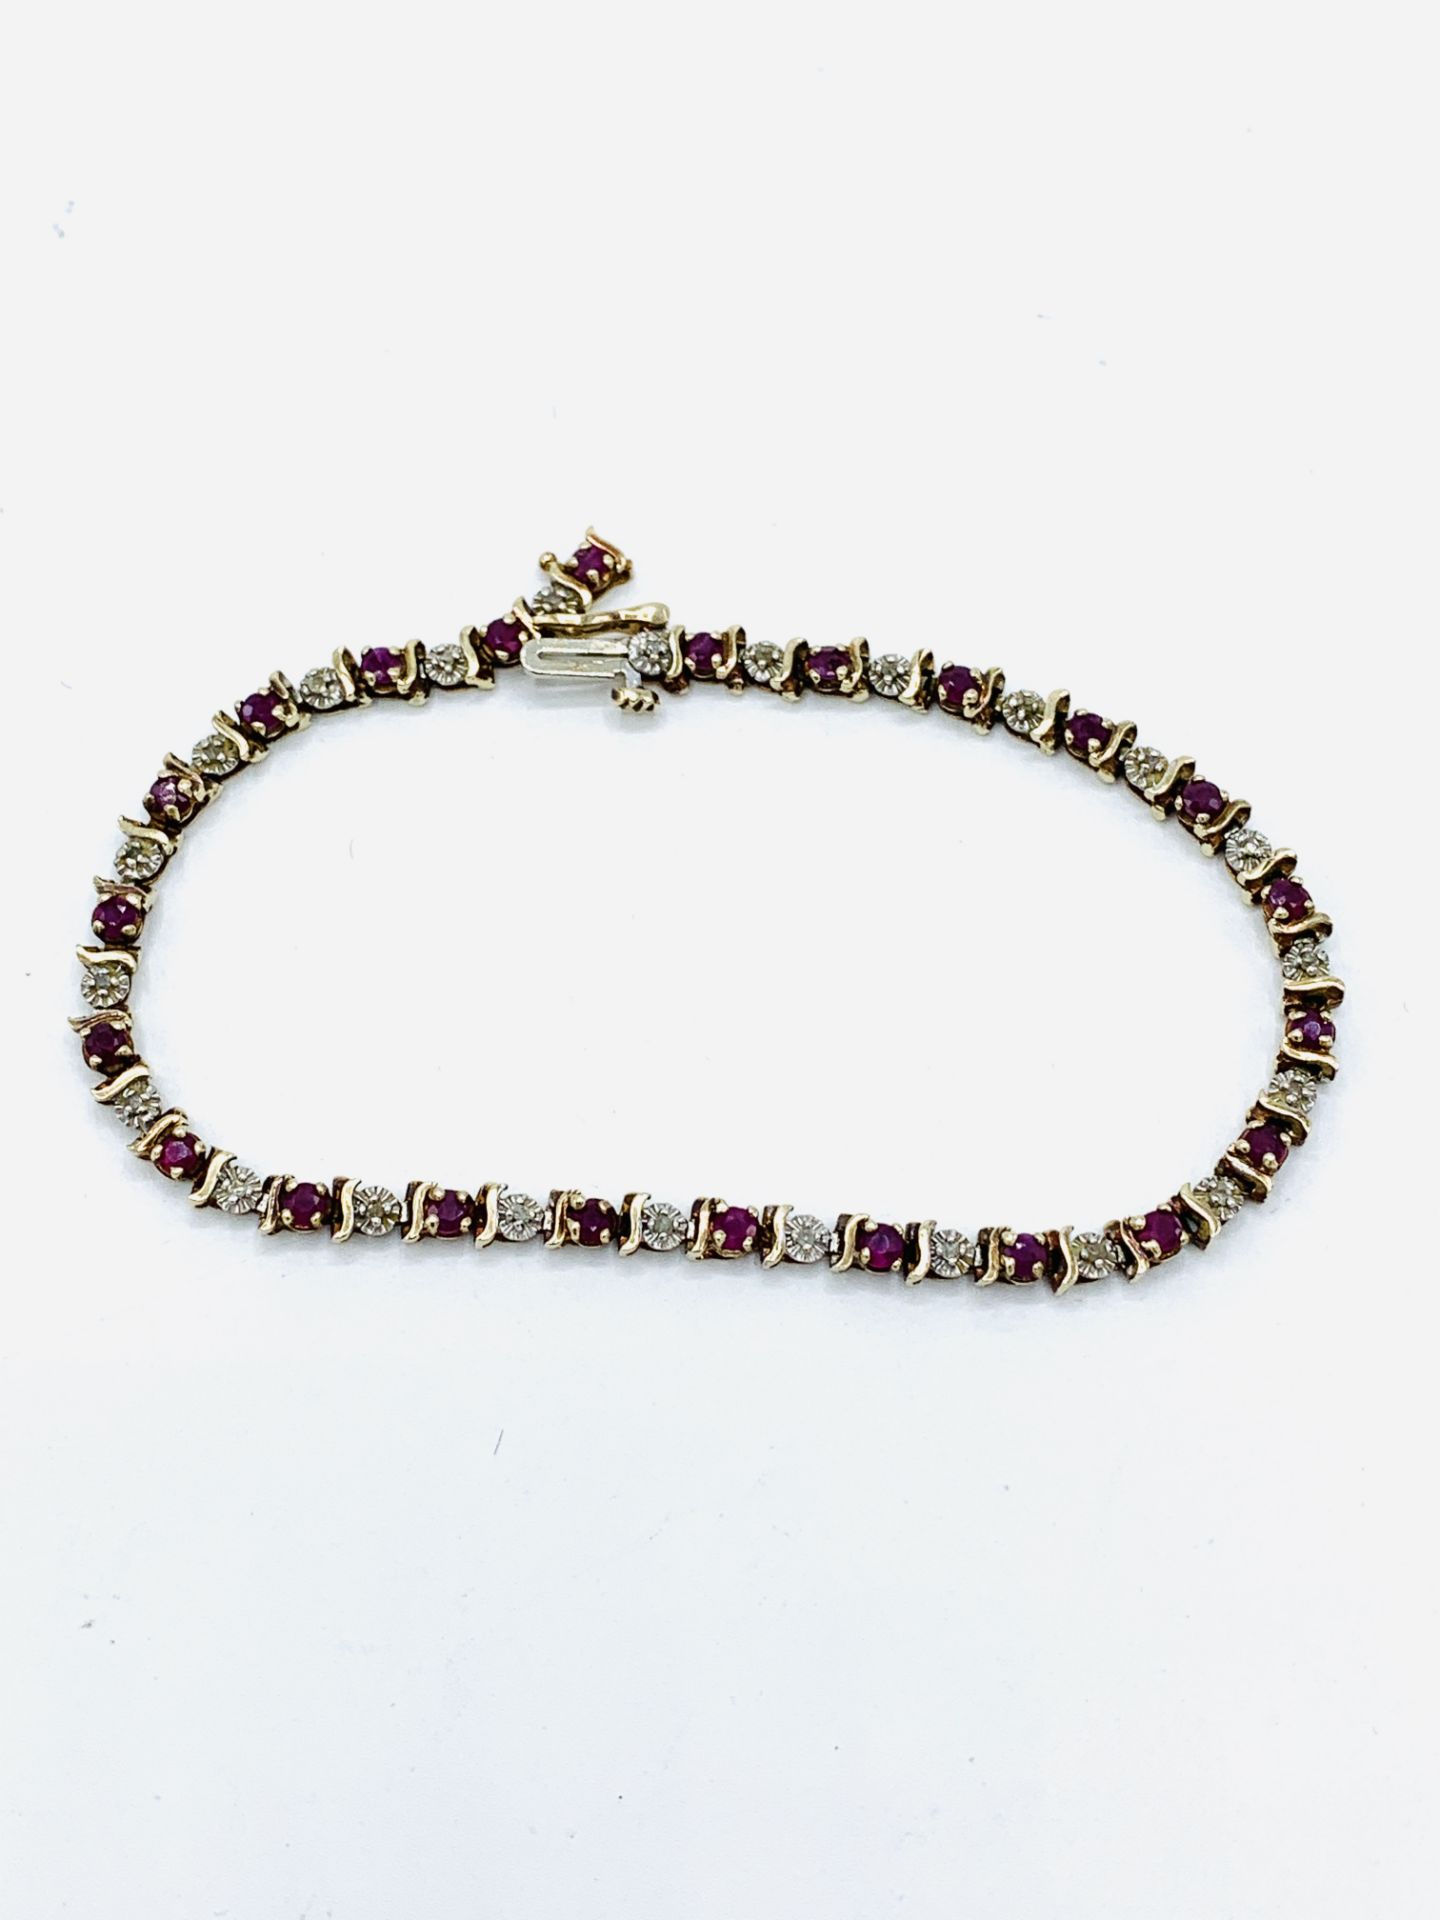 9ct gold tennis bracelet with diamonds and rubies.